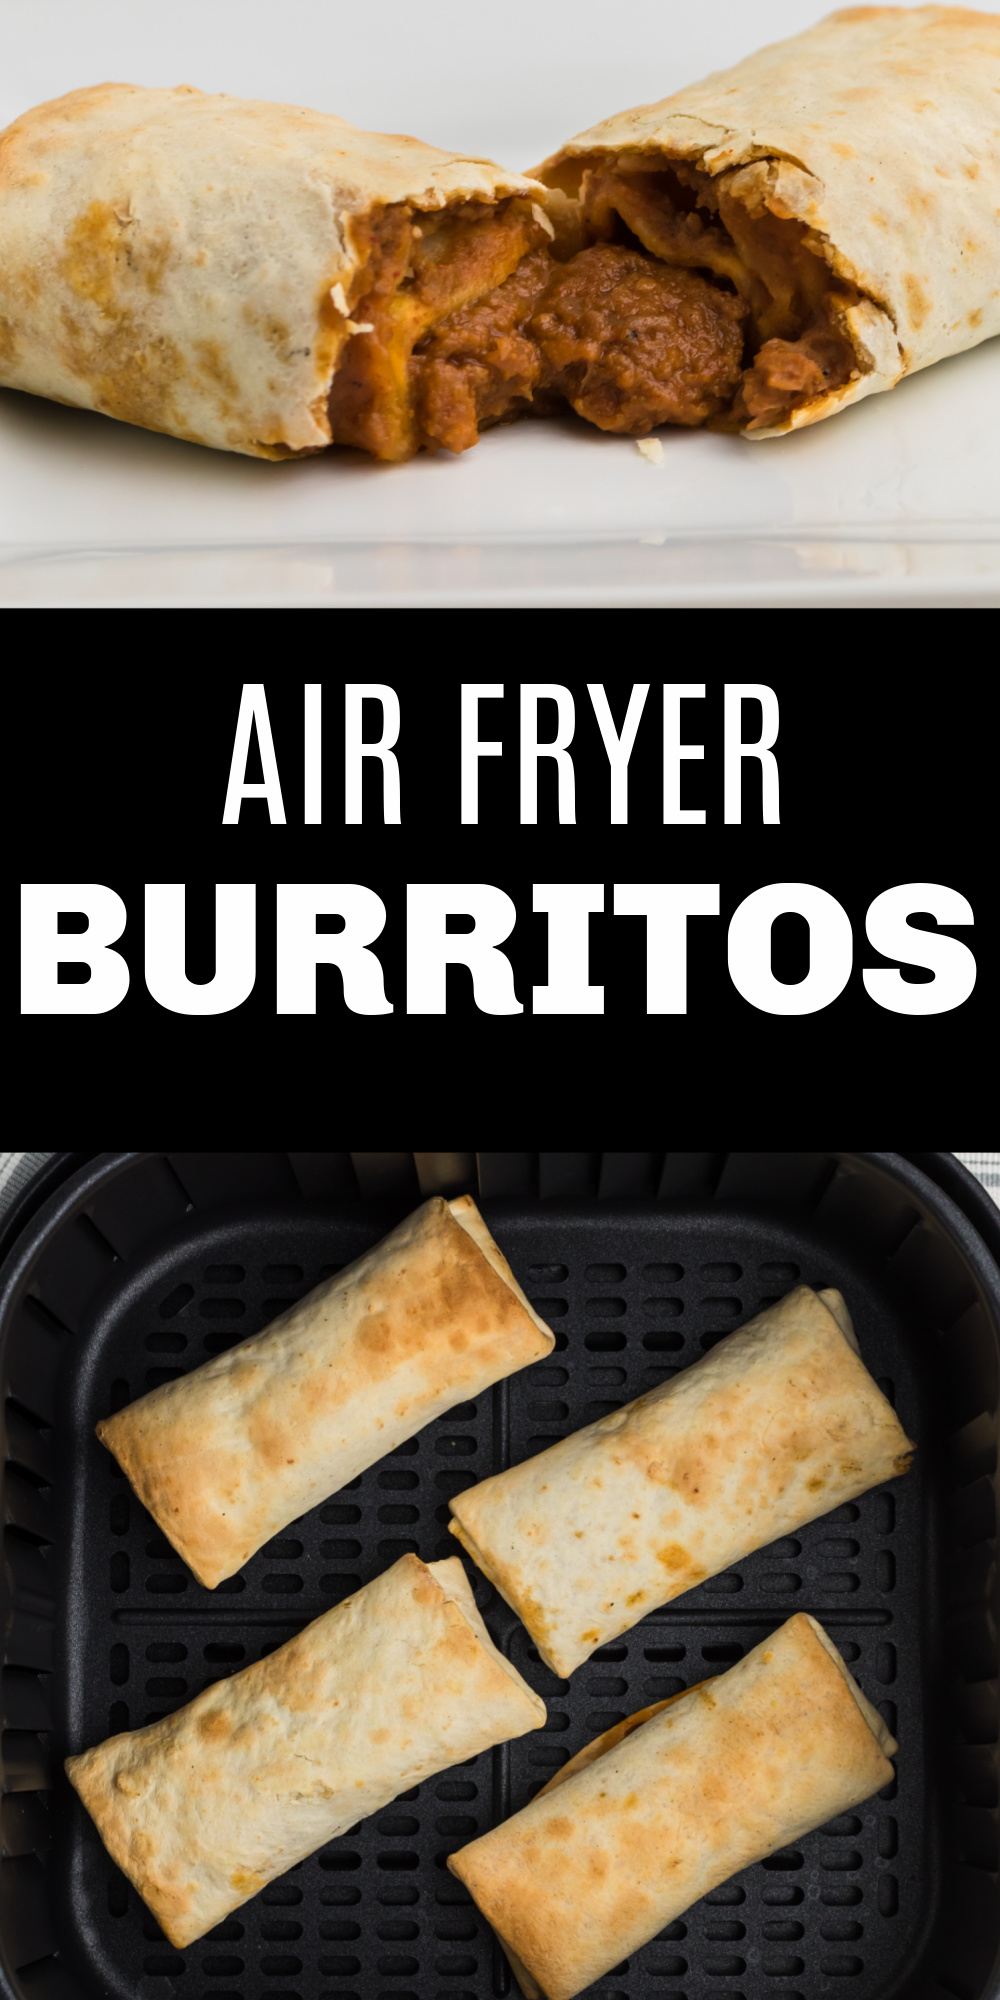 Making Air Fryer Burritos is a simple and easy recipe. Cooking this recipe for frozen burritos in air fryer is one of the best ways to cut down on the cooking time while also making an easy burrito recipe. This is a great way to make a meal the whole family will love!